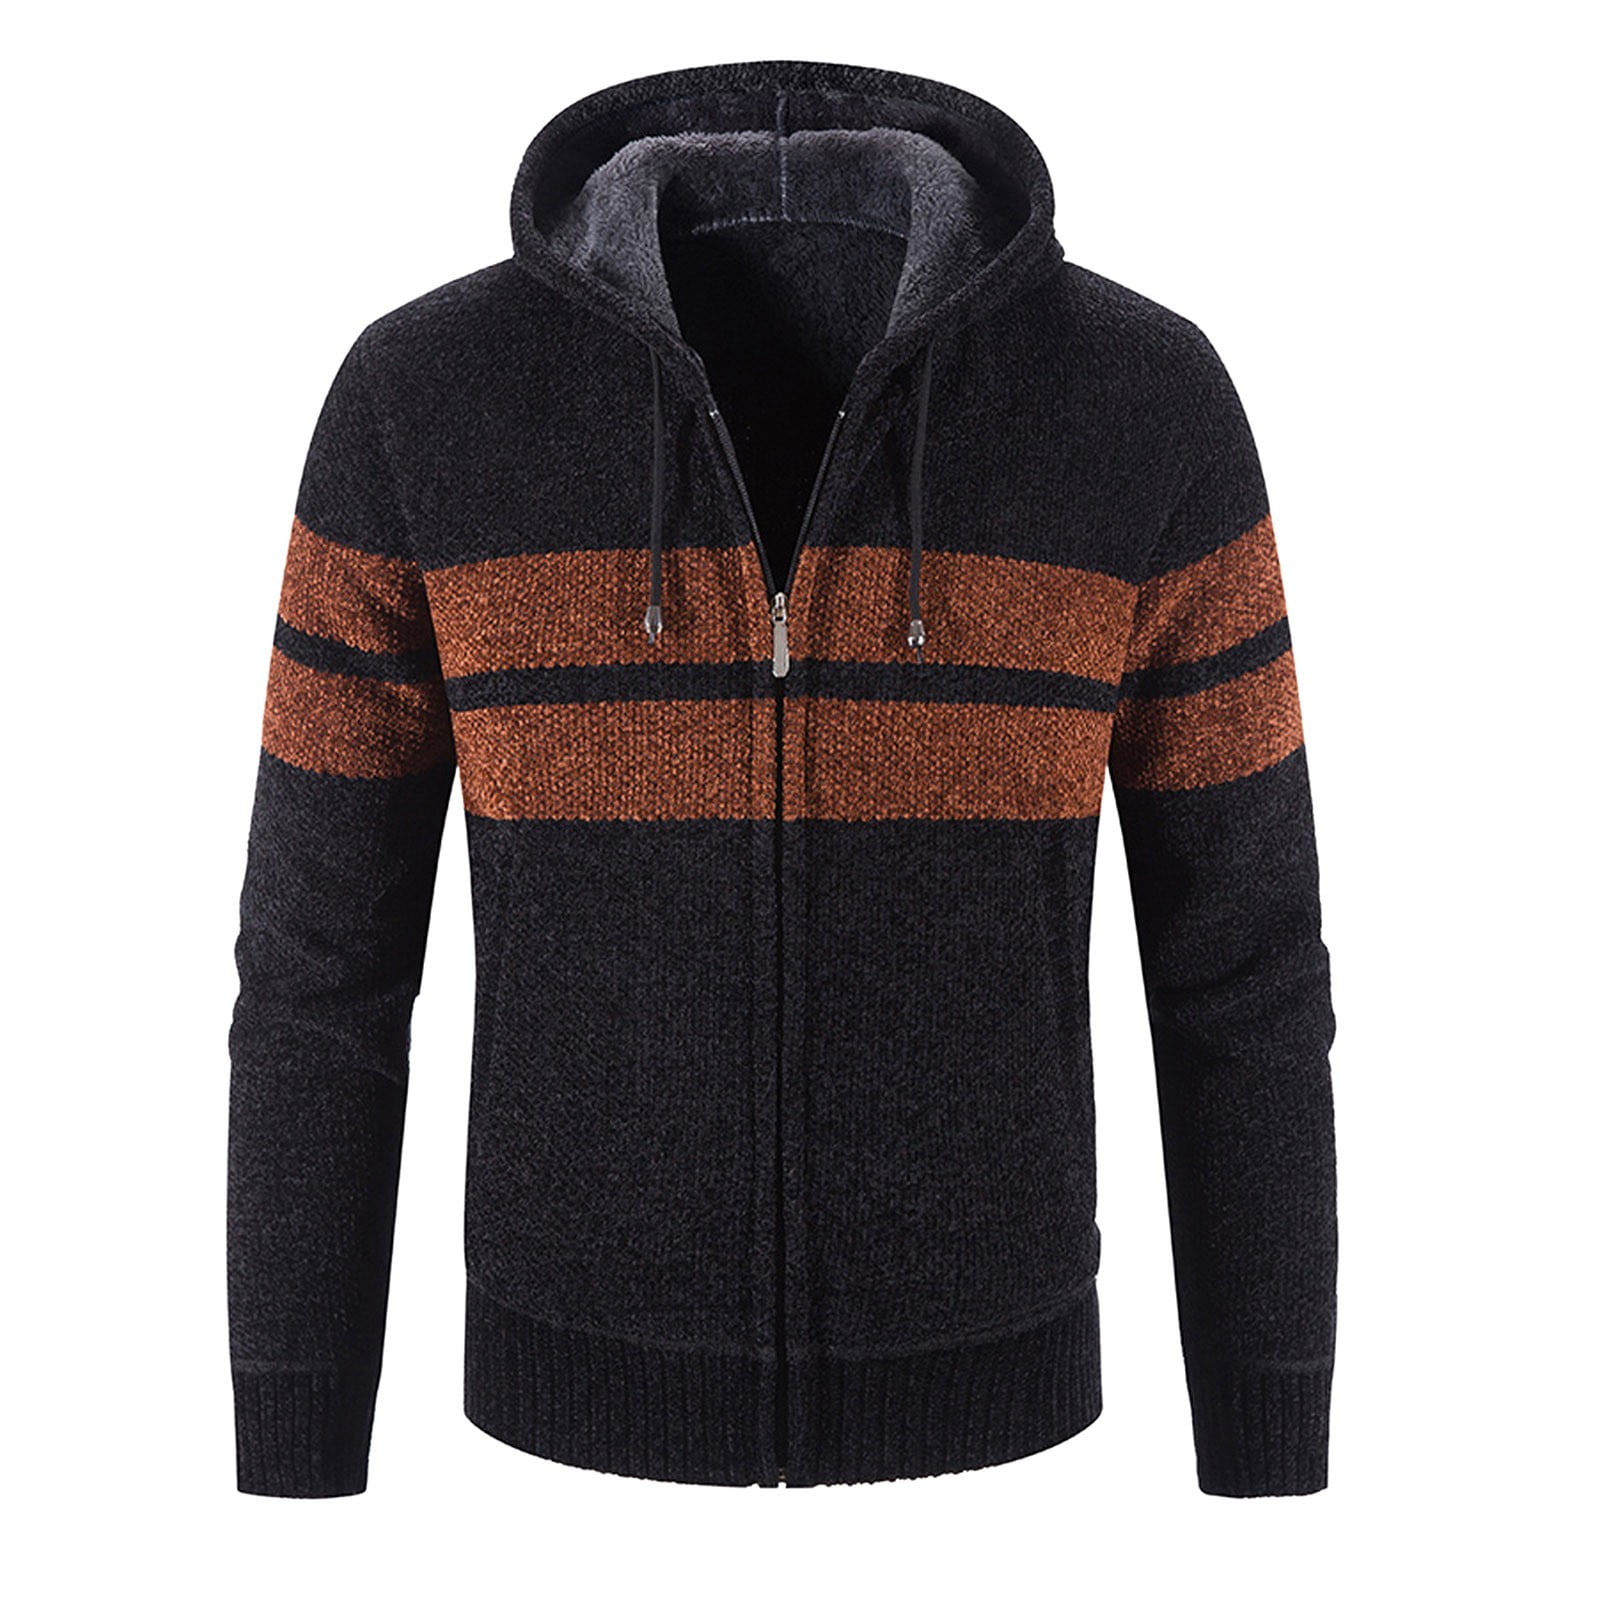 Large Size Men Solid Knitted Sweater Jacket With Zipper, Hooded Pockets,  And Black Korean Style Perfect For Winter 201120 From Dou01, $35.78